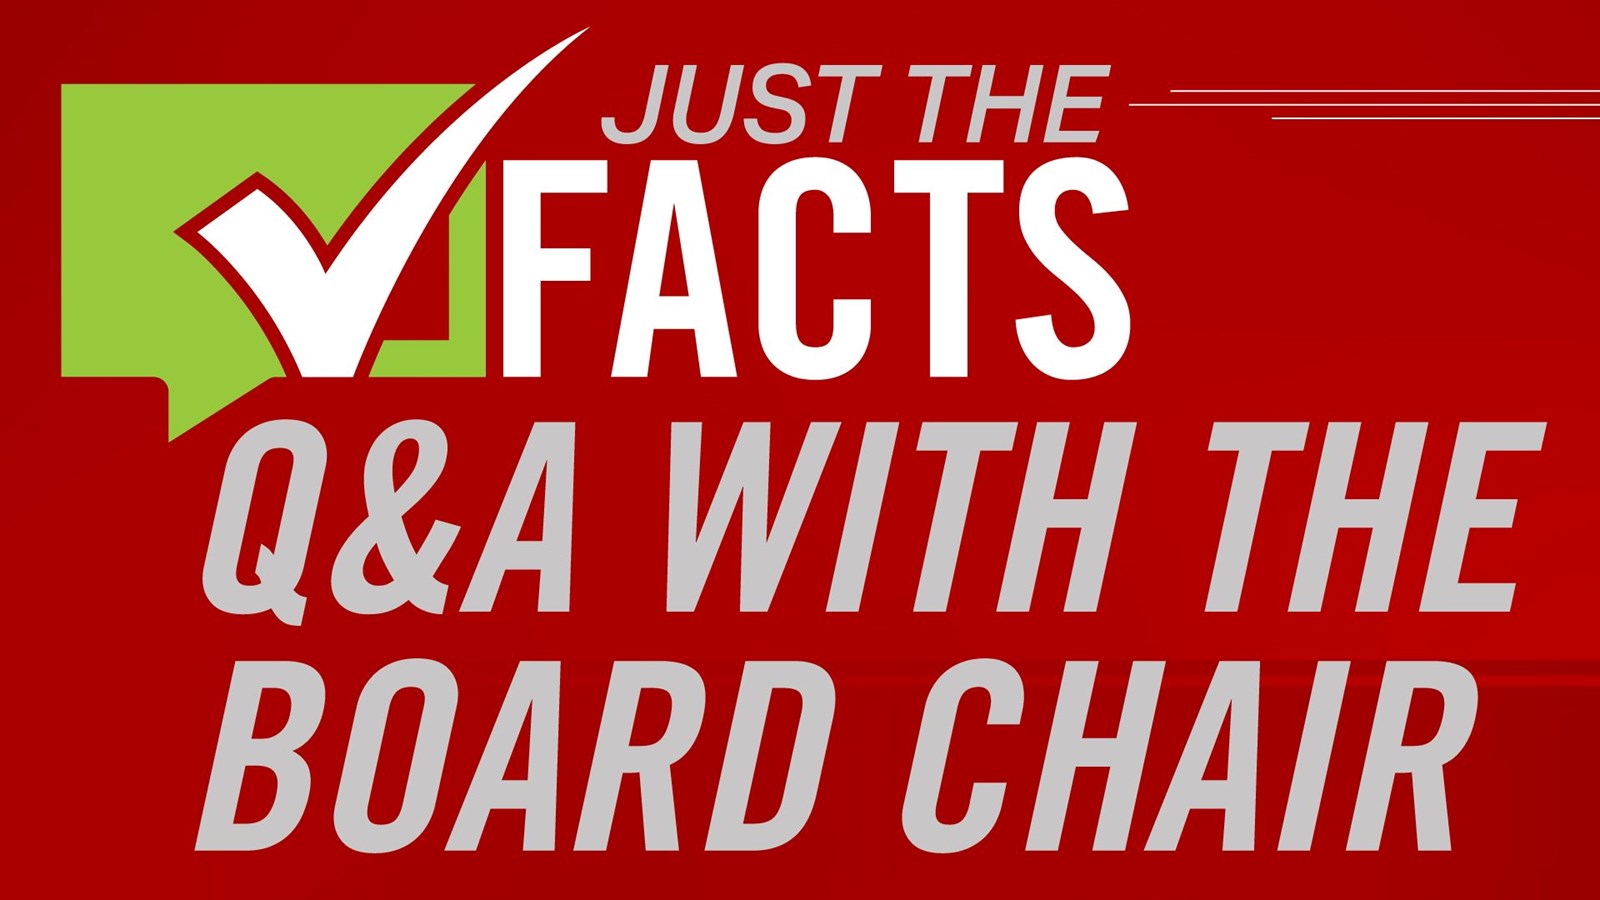 Just the Facts: Q and A with the Board Chair